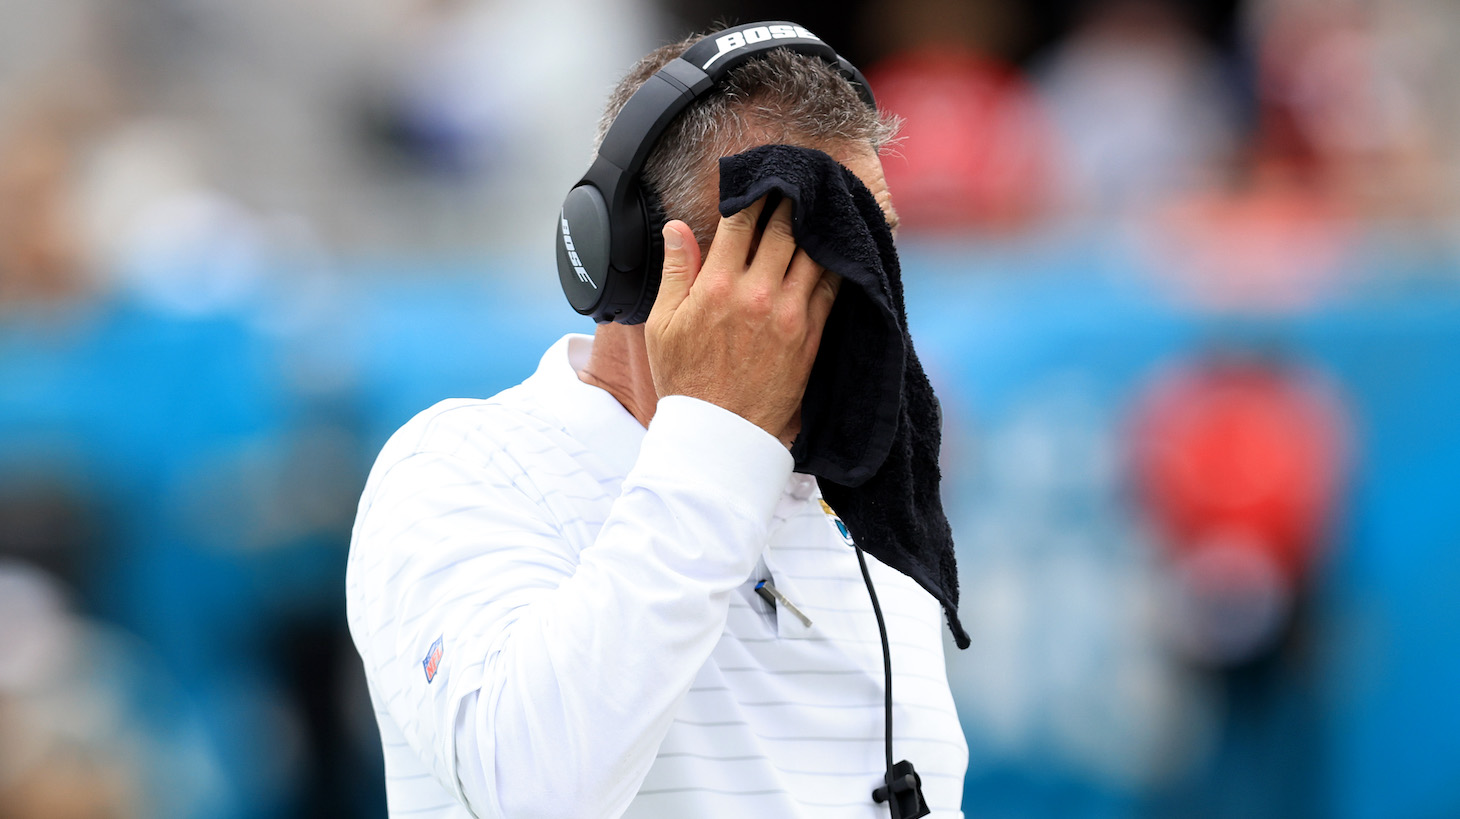 JACKSONVILLE, FLORIDA - SEPTEMBER 19: Head coach Urban Meyer of the Jacksonville Jaguars wipes his face with a towel during the game against the Denver Broncos at TIAA Bank Field on September 19, 2021 in Jacksonville, Florida. (Photo by Sam Greenwood/Getty Images)